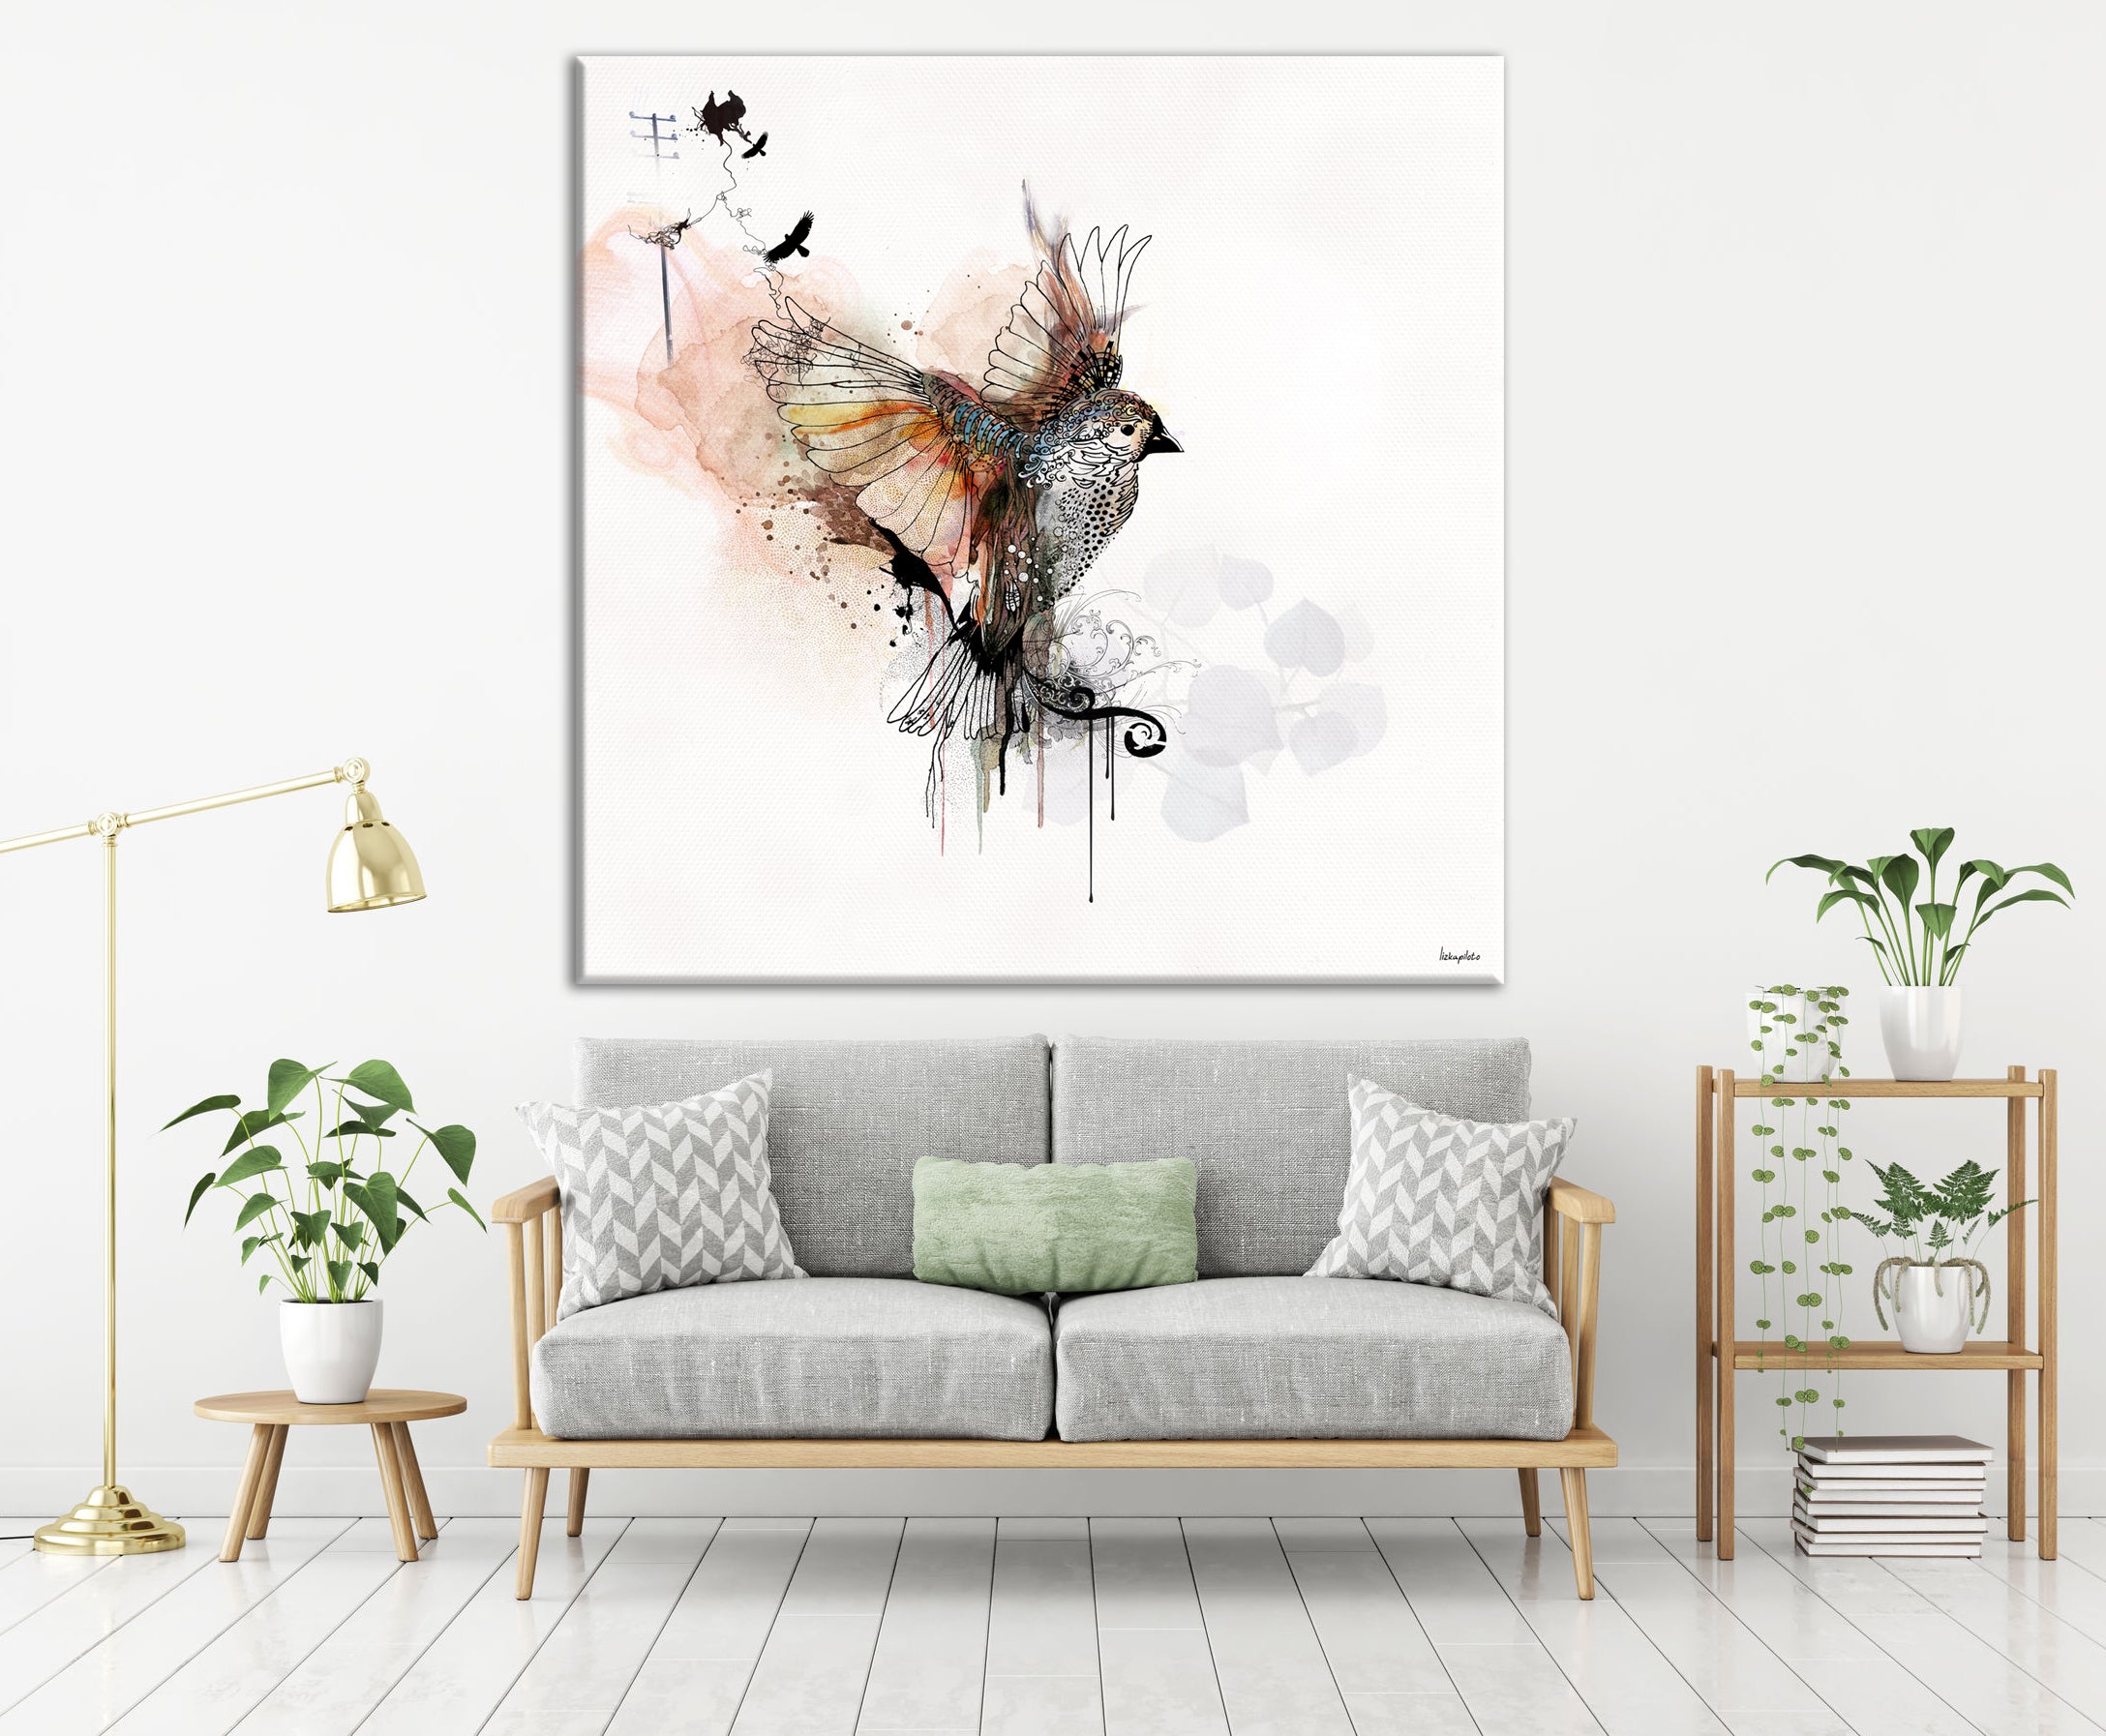 Flying bird art, hanged on a white wall, above a gray sofa